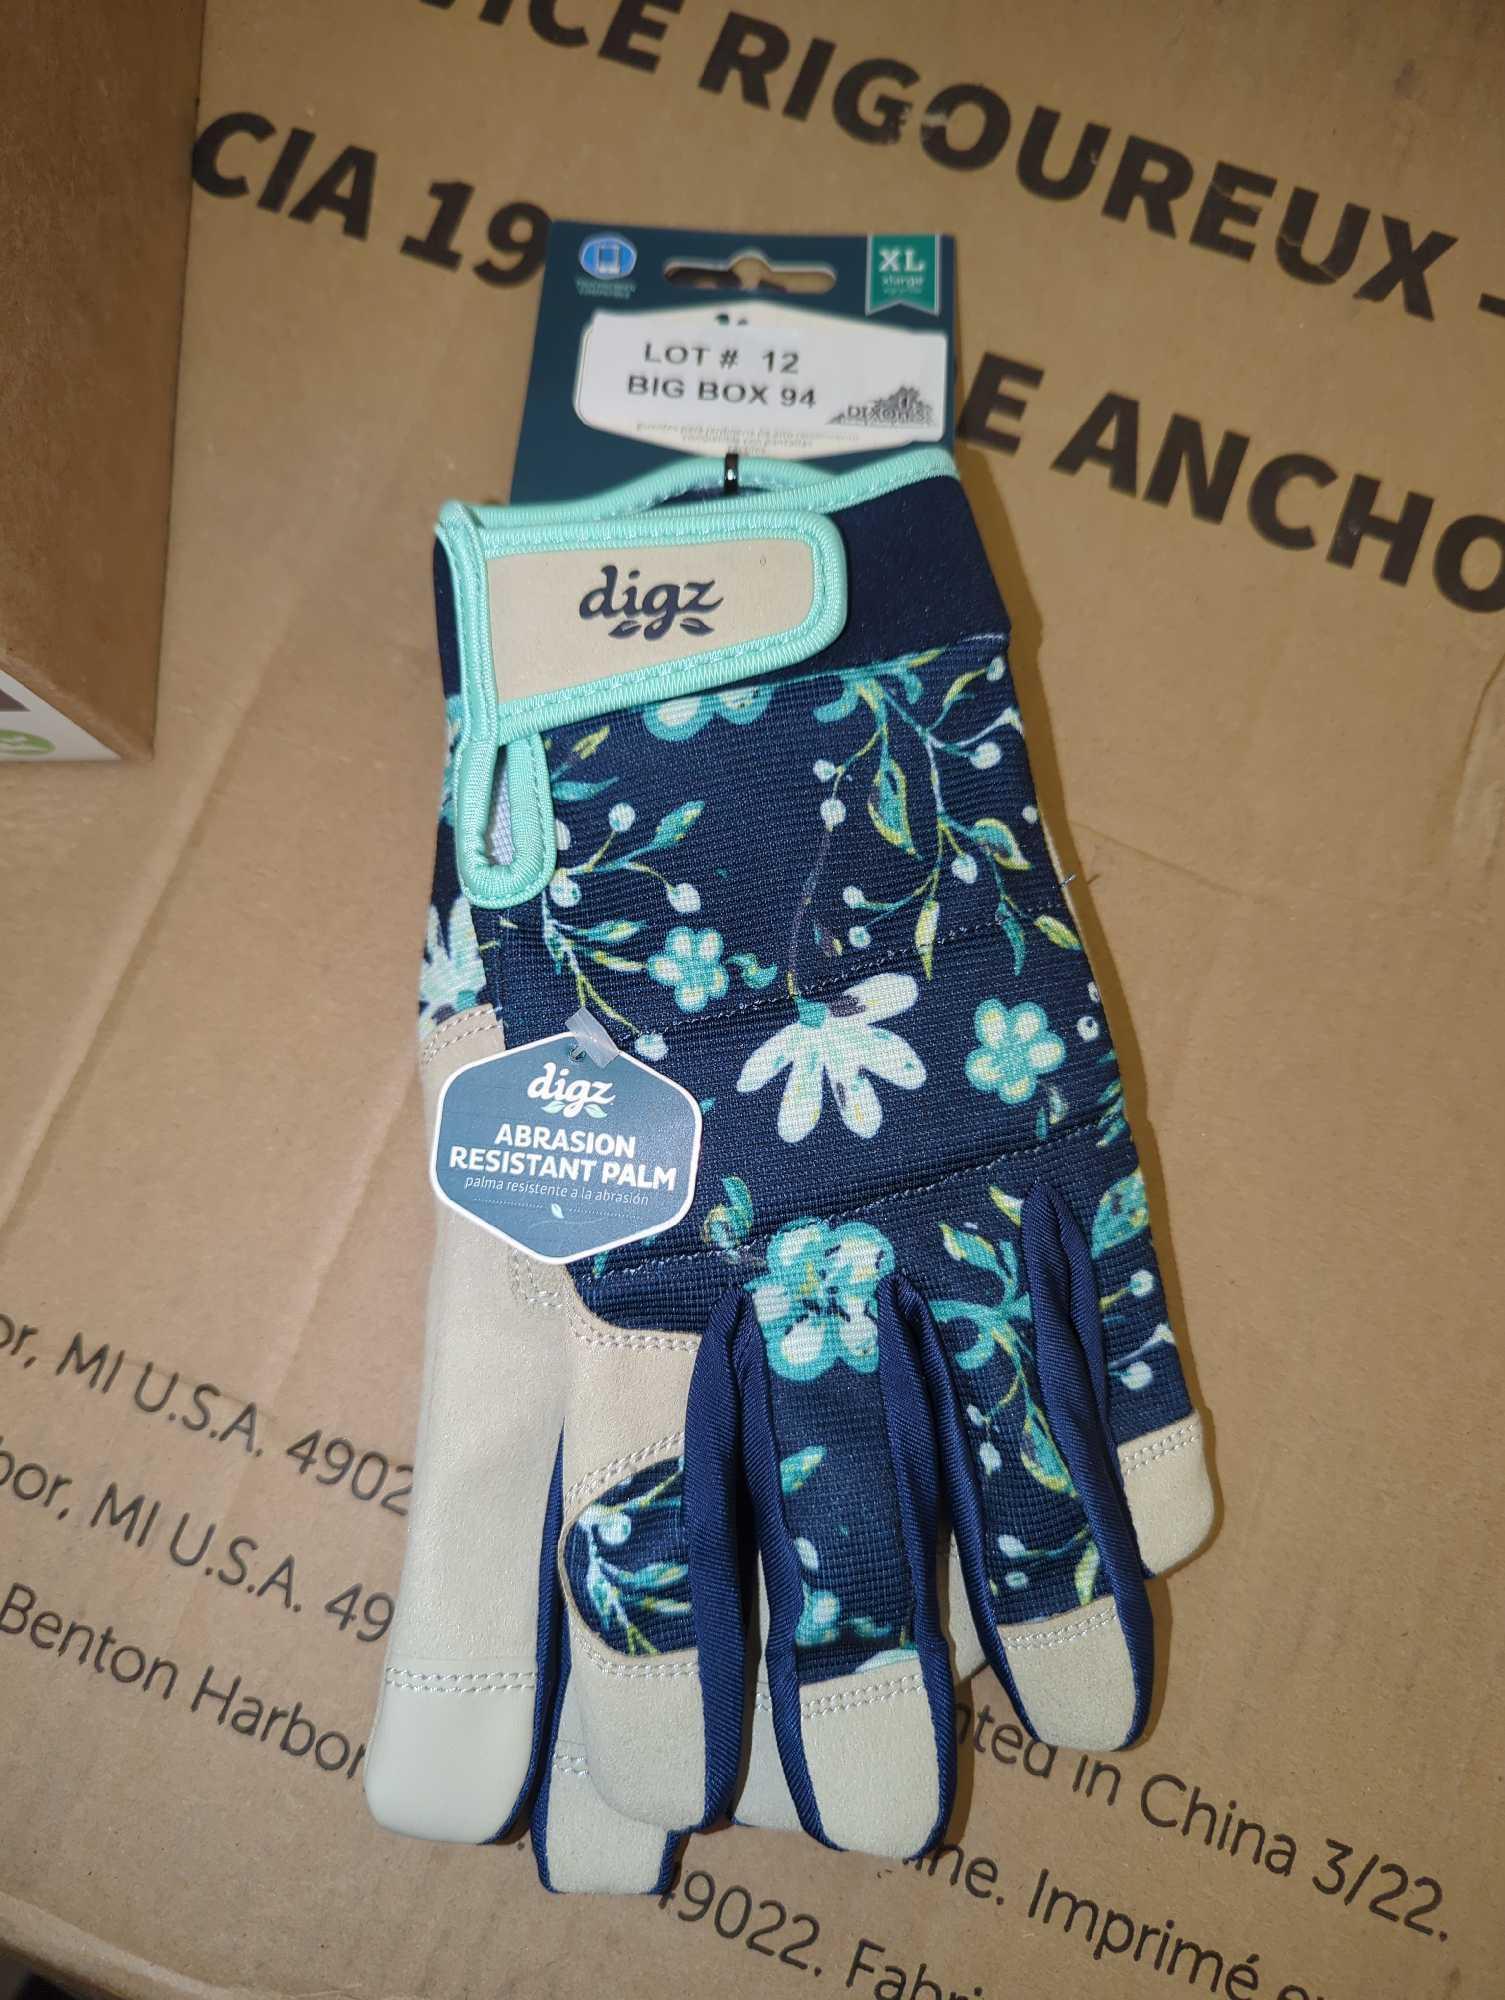 Lot of 10 Pairs of Digz Women's X-Large Gardener Gloves, Retail Price $11/Pair, Appears to be New,